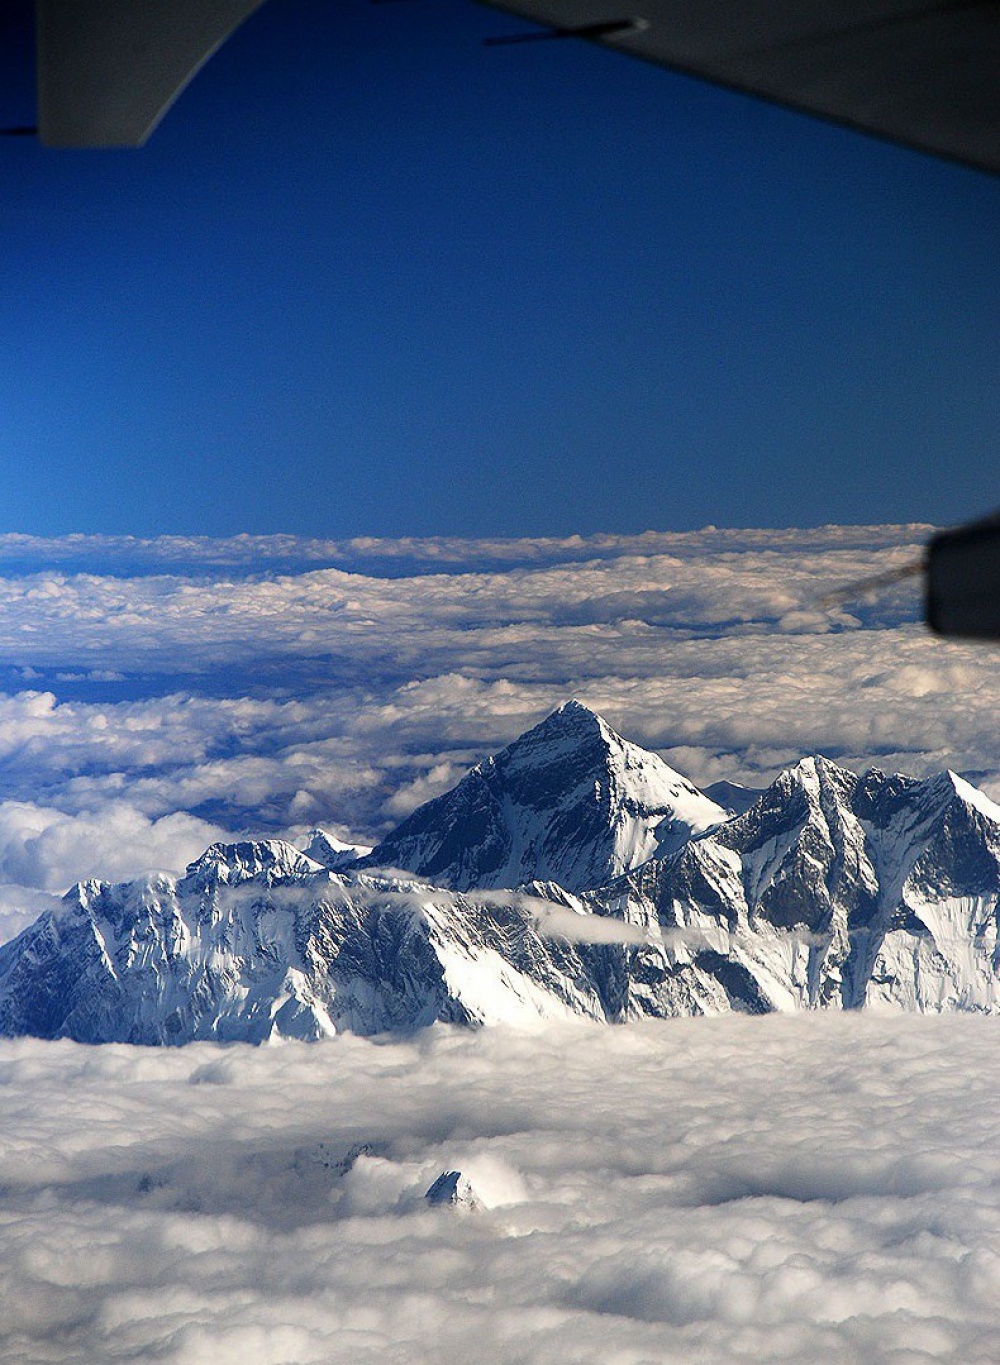 A view of Mount Everest from a plane